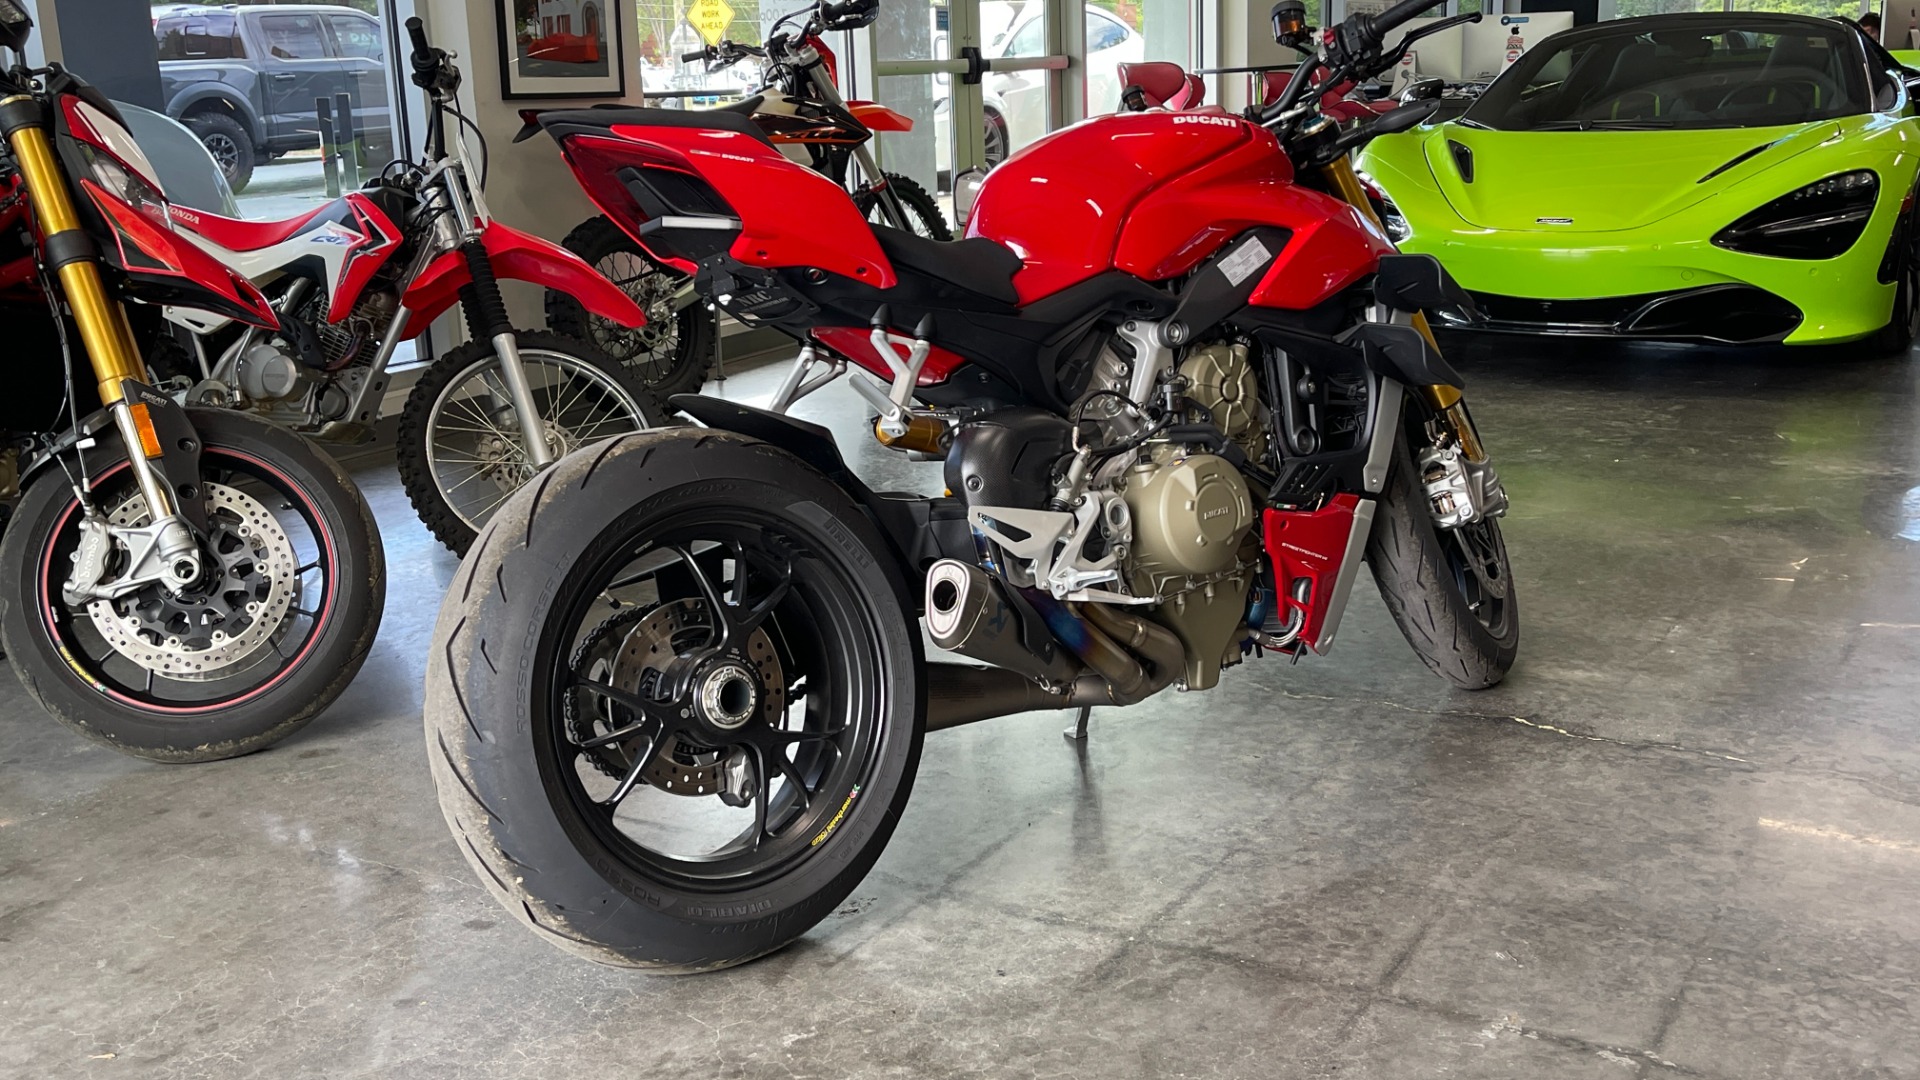 Used 2020 Ducati STREETFIGHTER V4S 1100CC MOTORCYCLE / 208HP (153 kW) / LIKE NEW for sale $24,599 at Formula Imports in Charlotte NC 28227 2